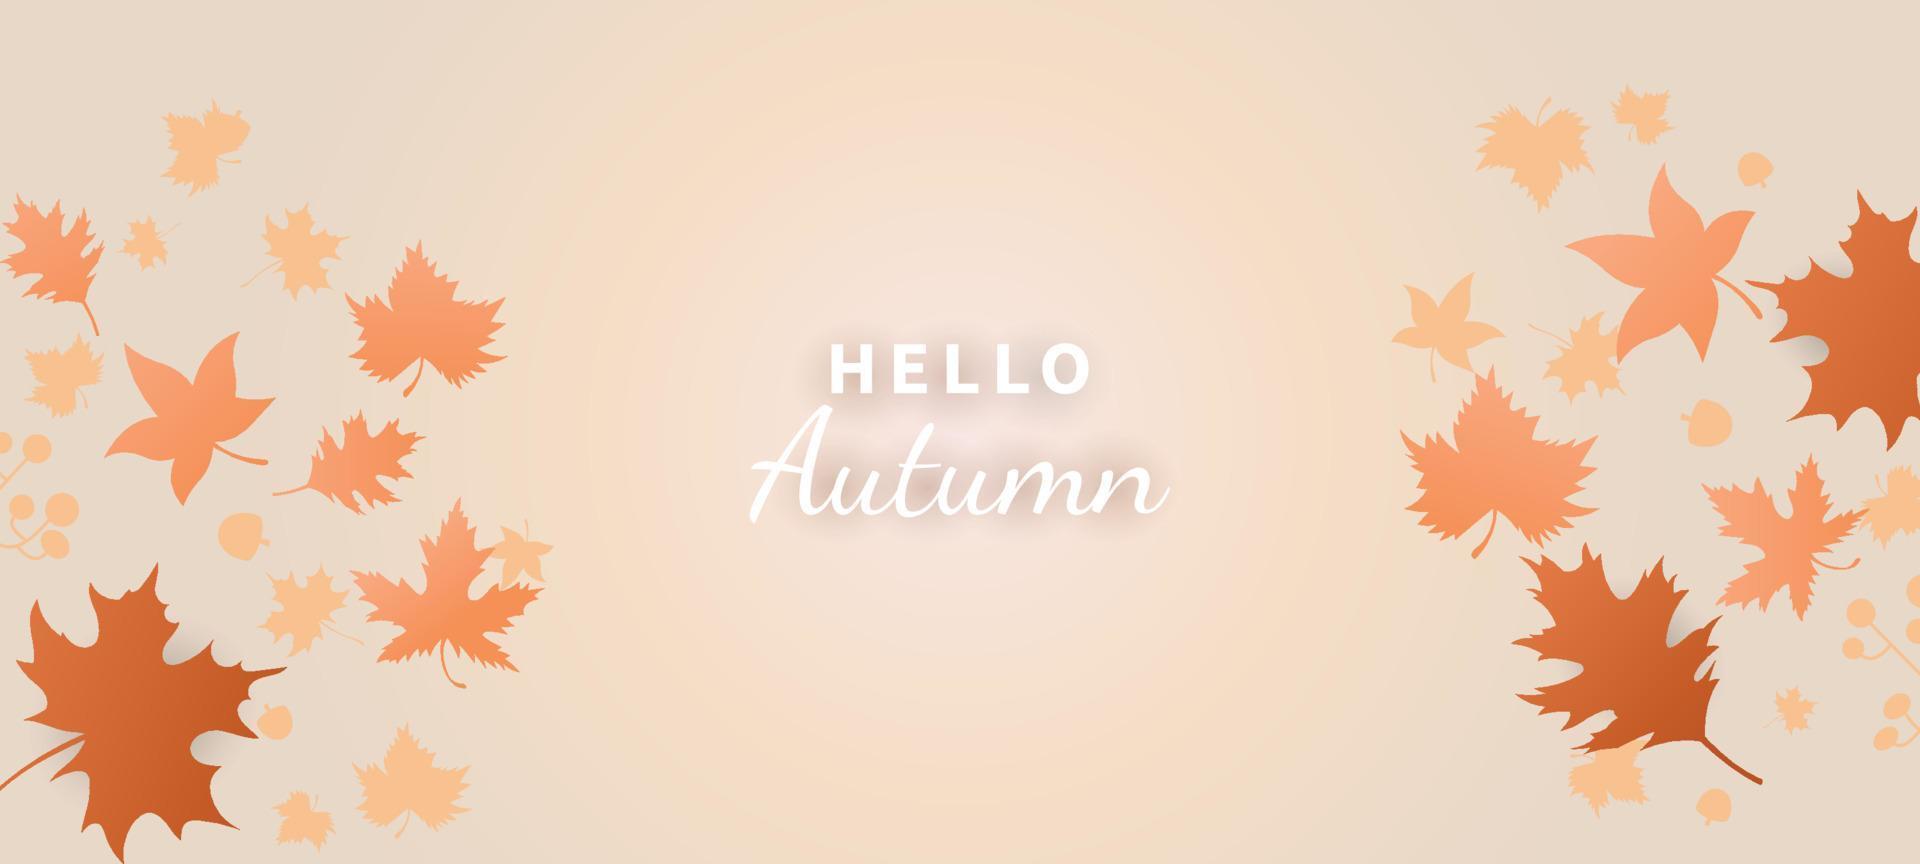 Hello autumn light background with fall leaves foliage vector